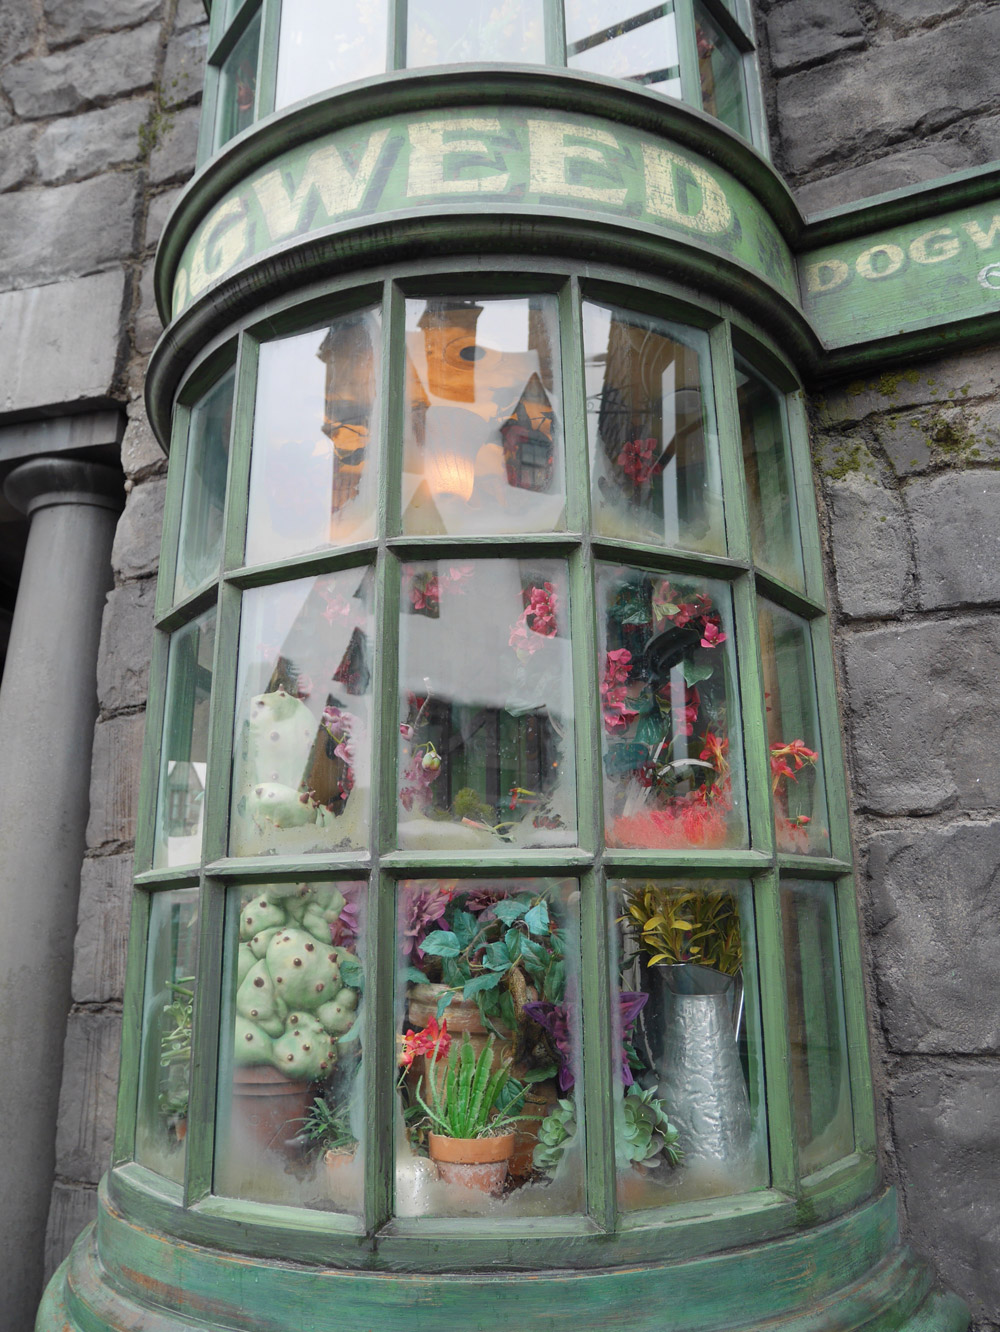 The Wizarding World of Harry Potter, Universal Studios Hollywood